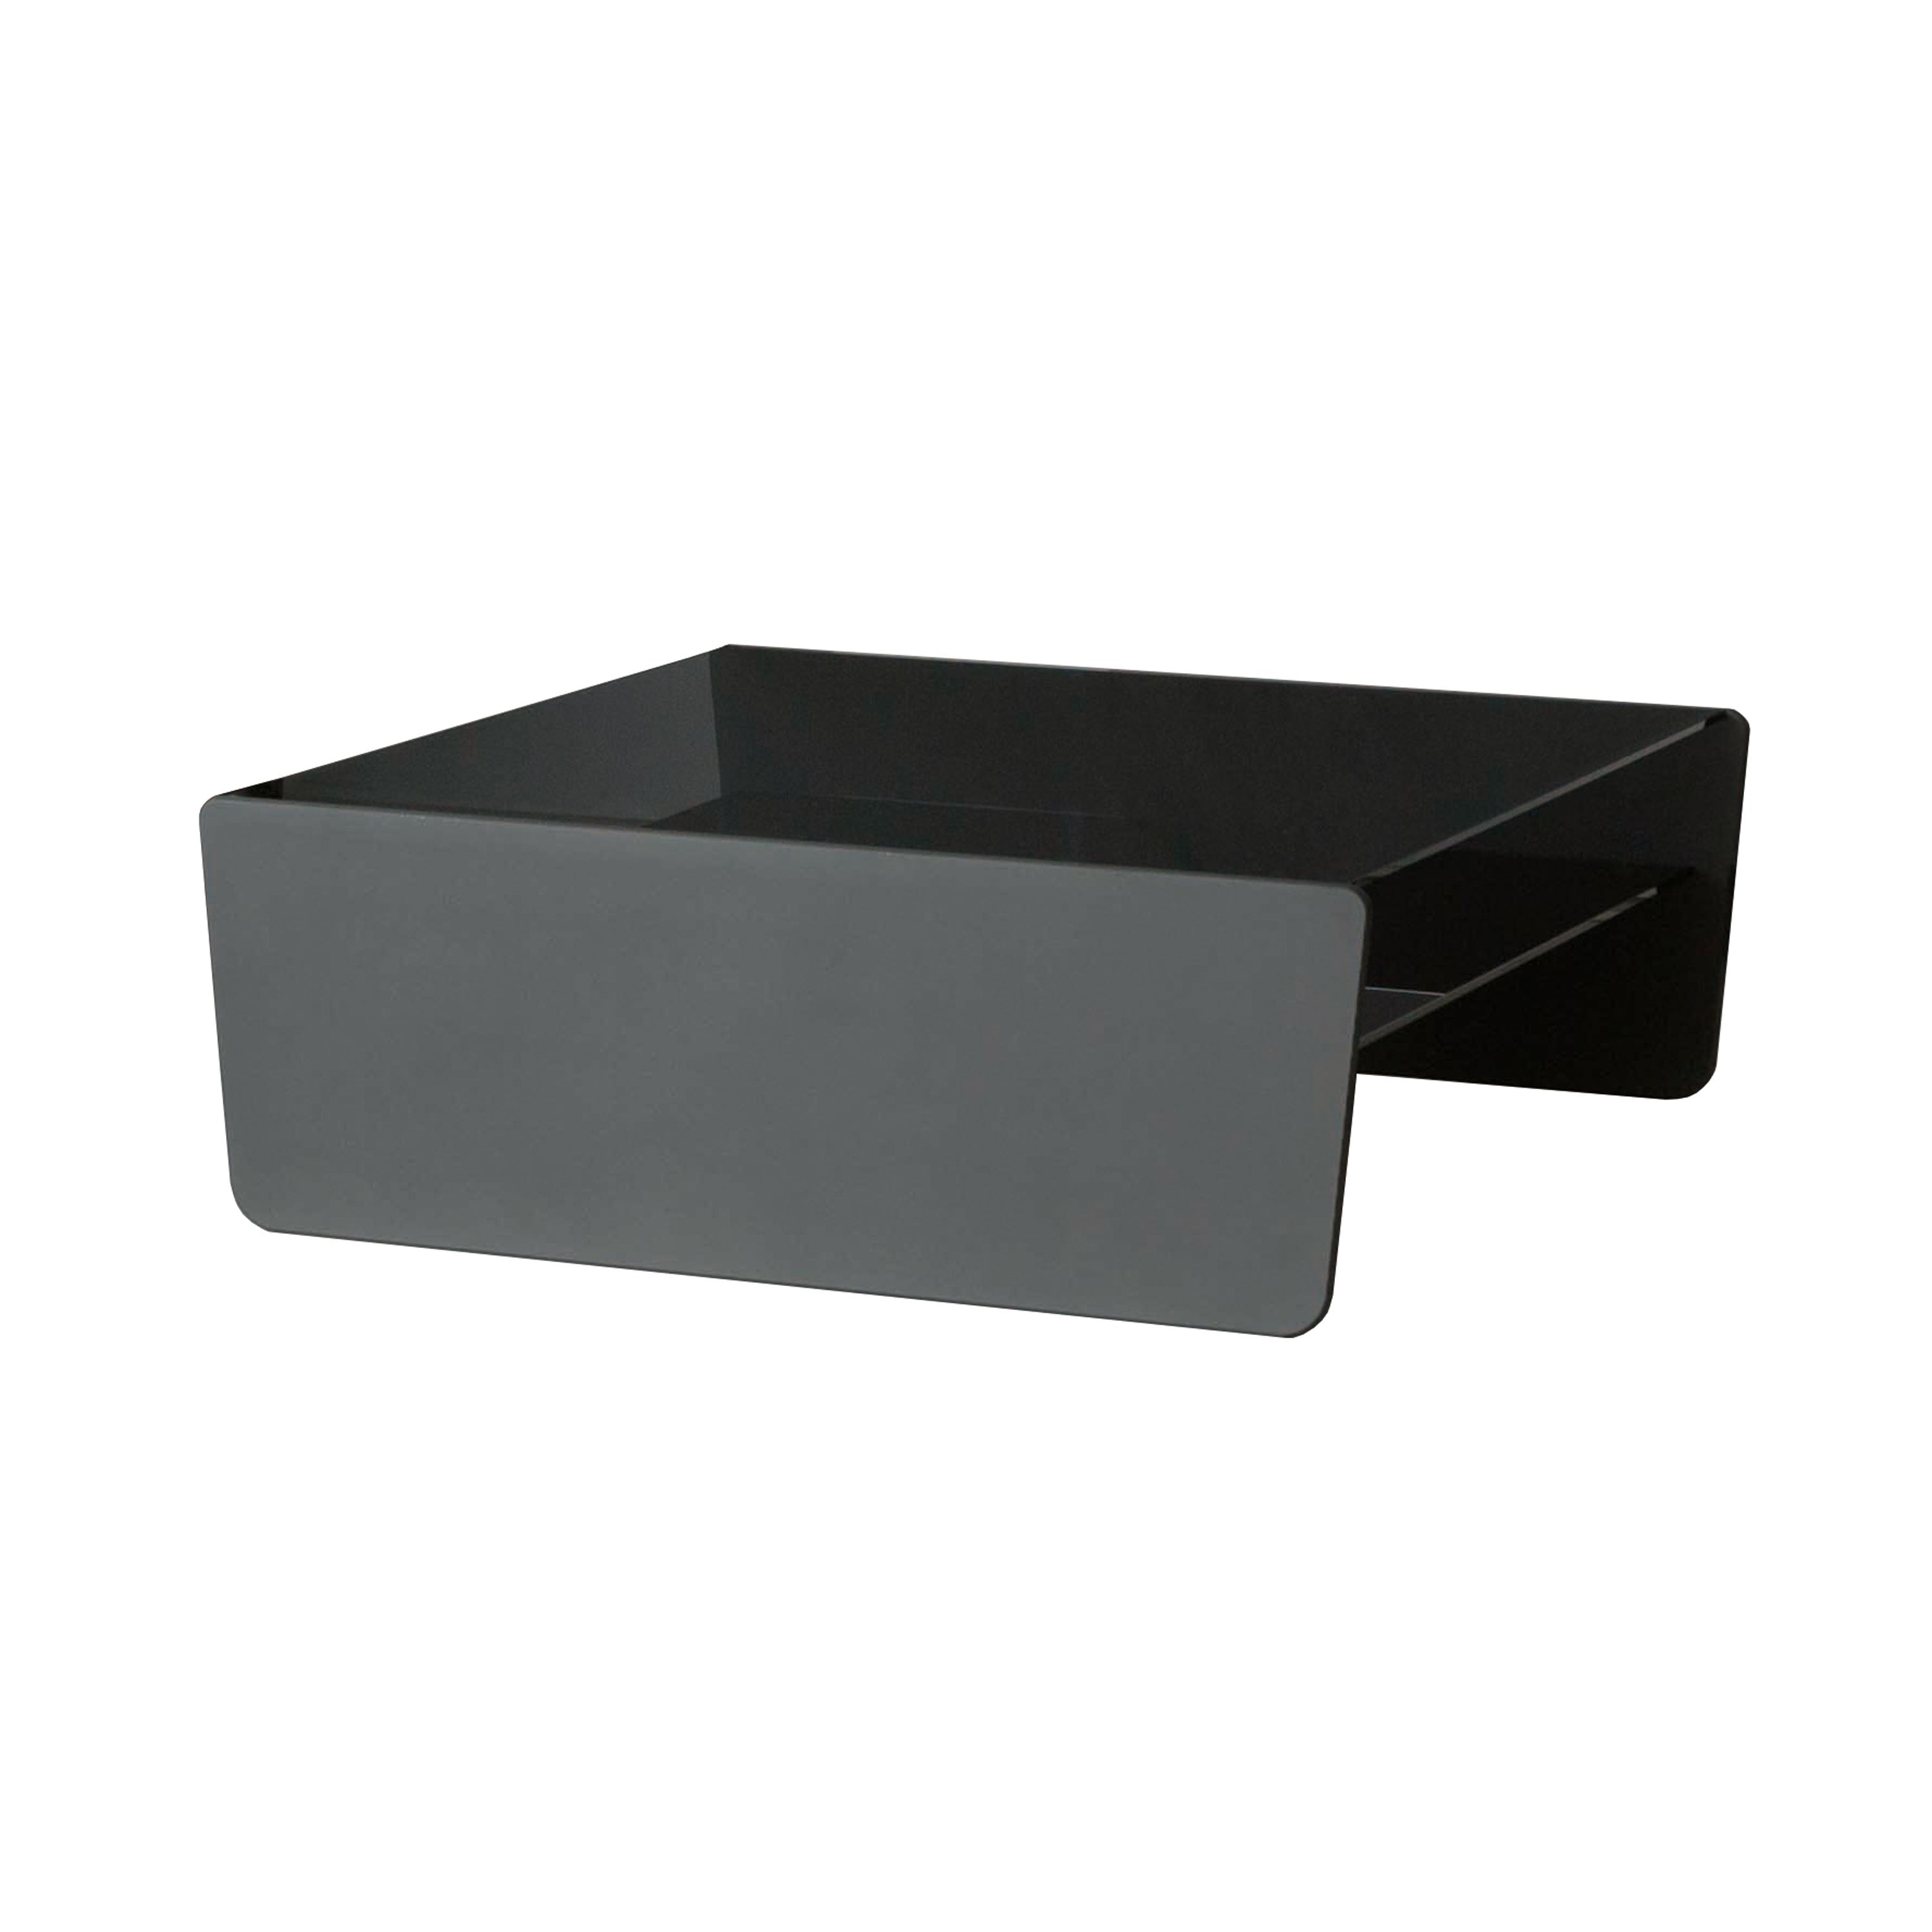 Sled Center Table: Grey Glass